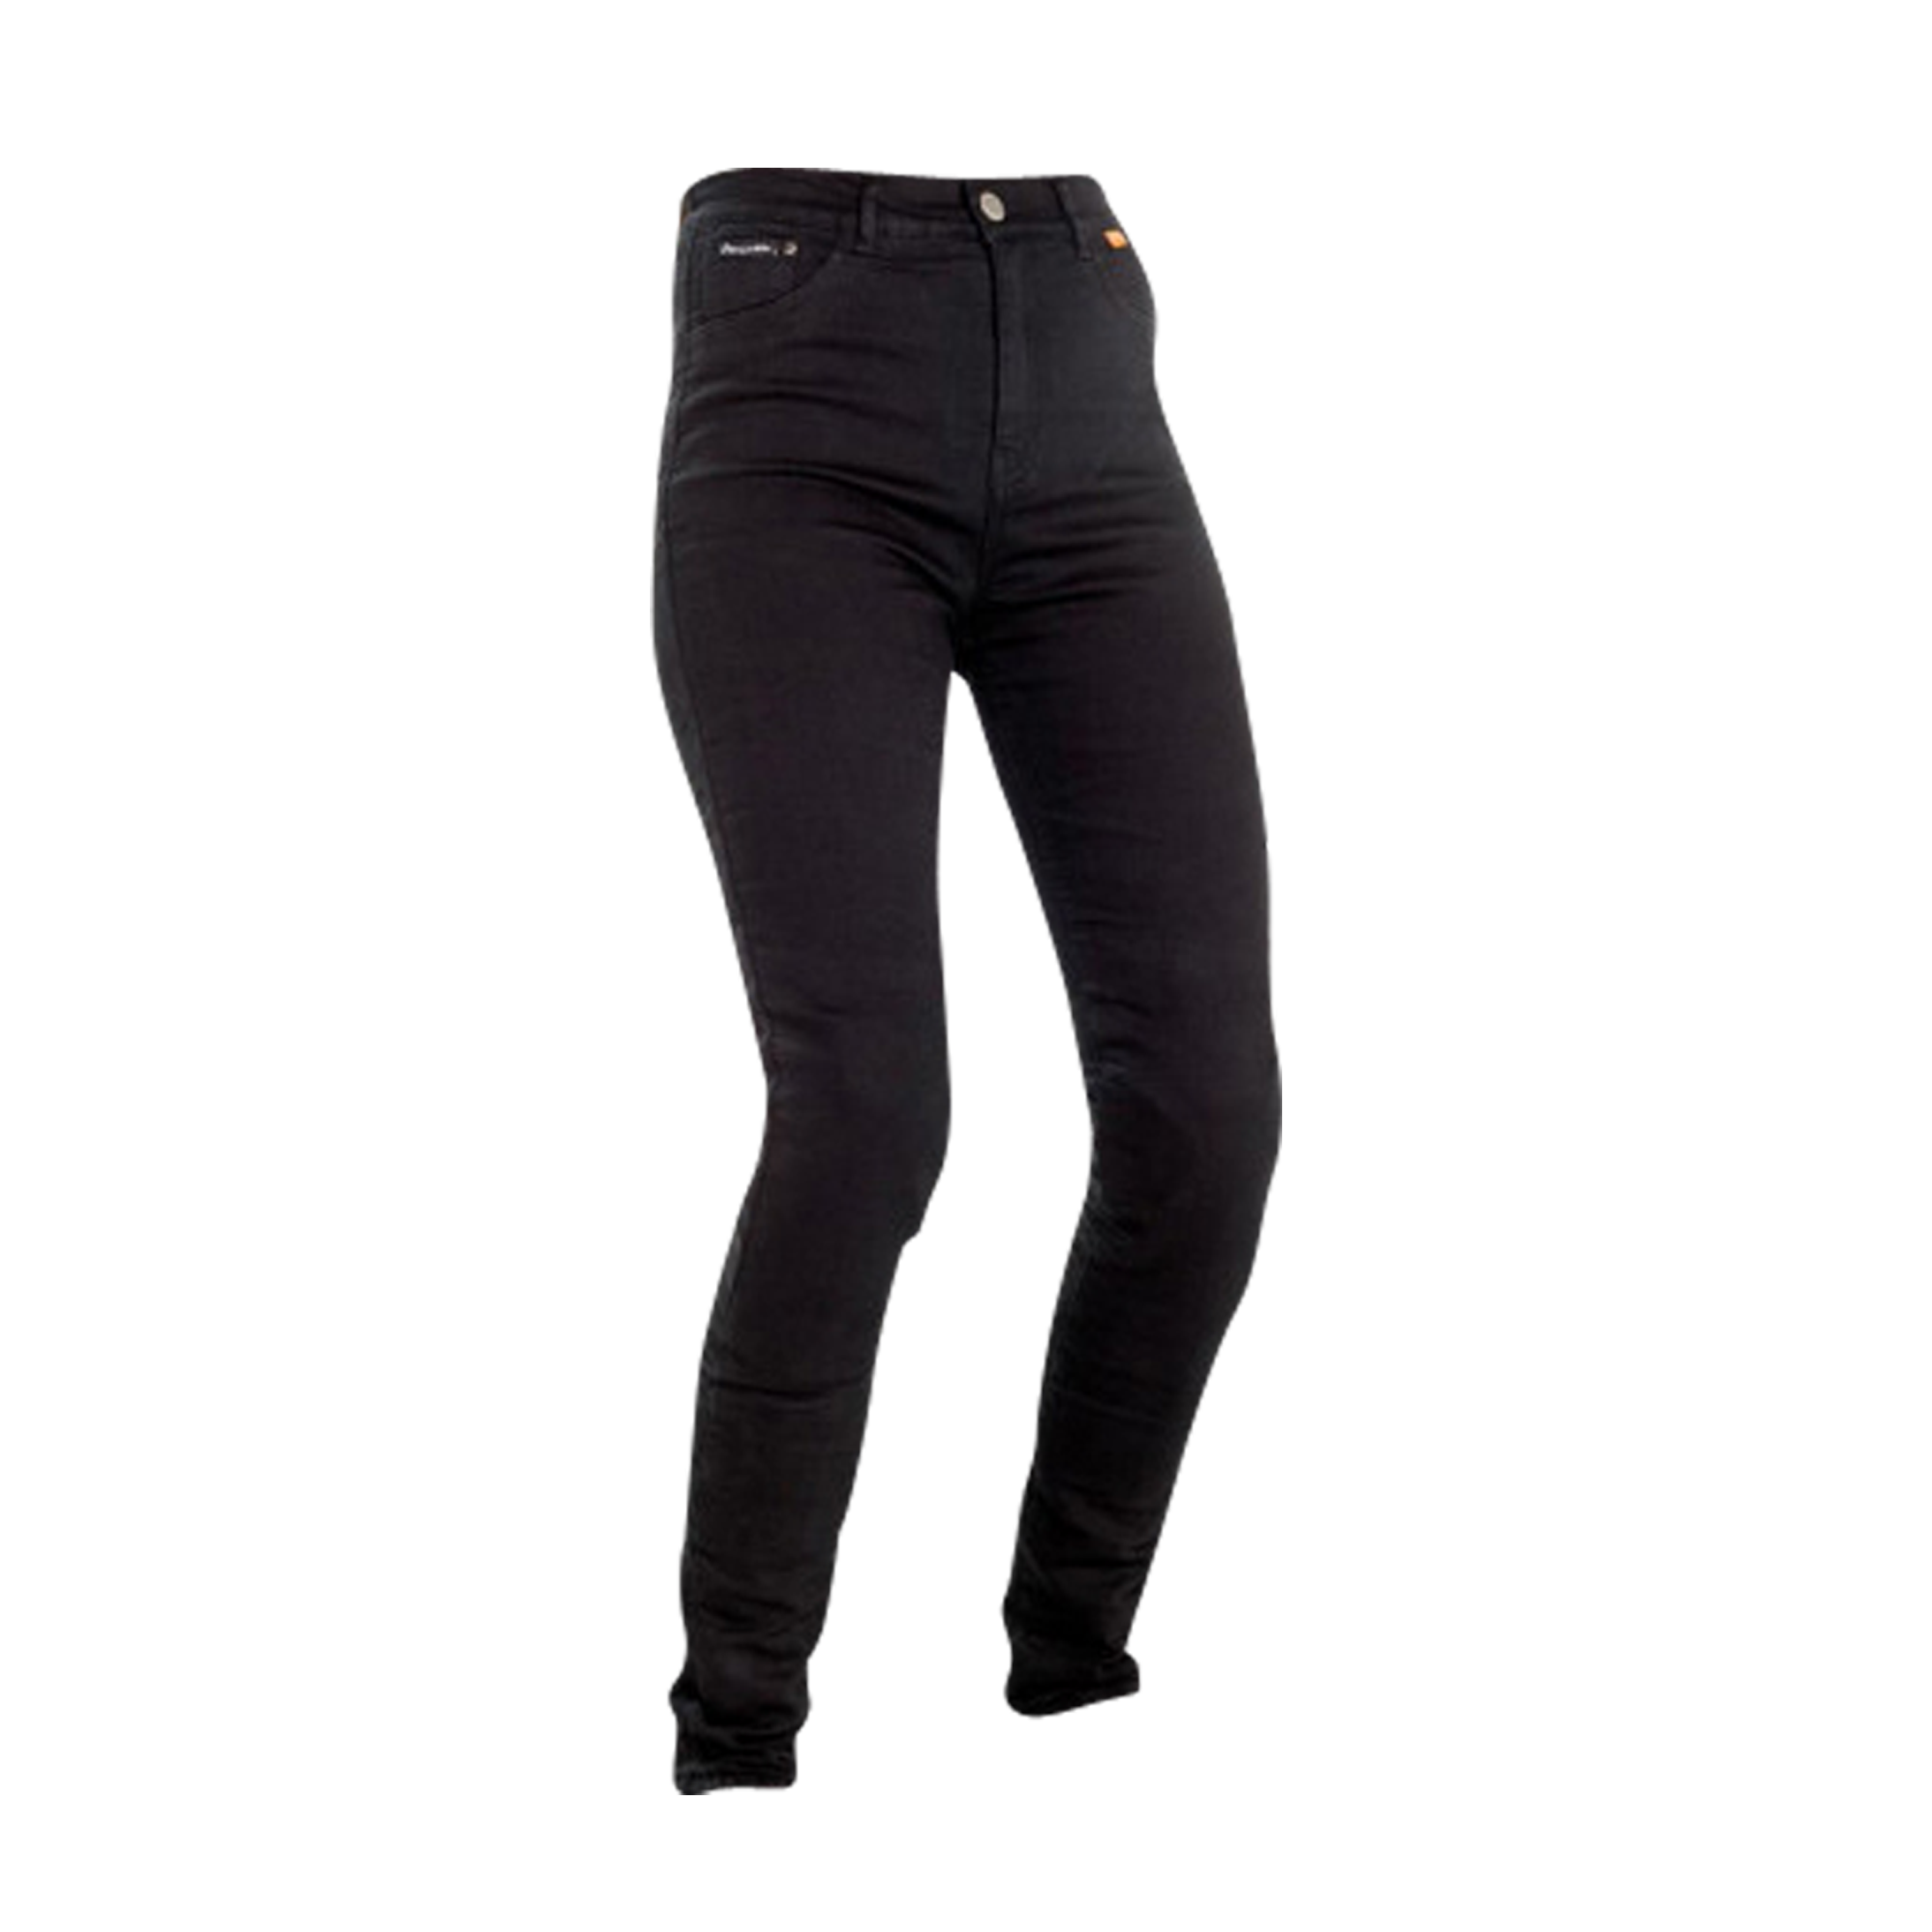 black jegging trousers